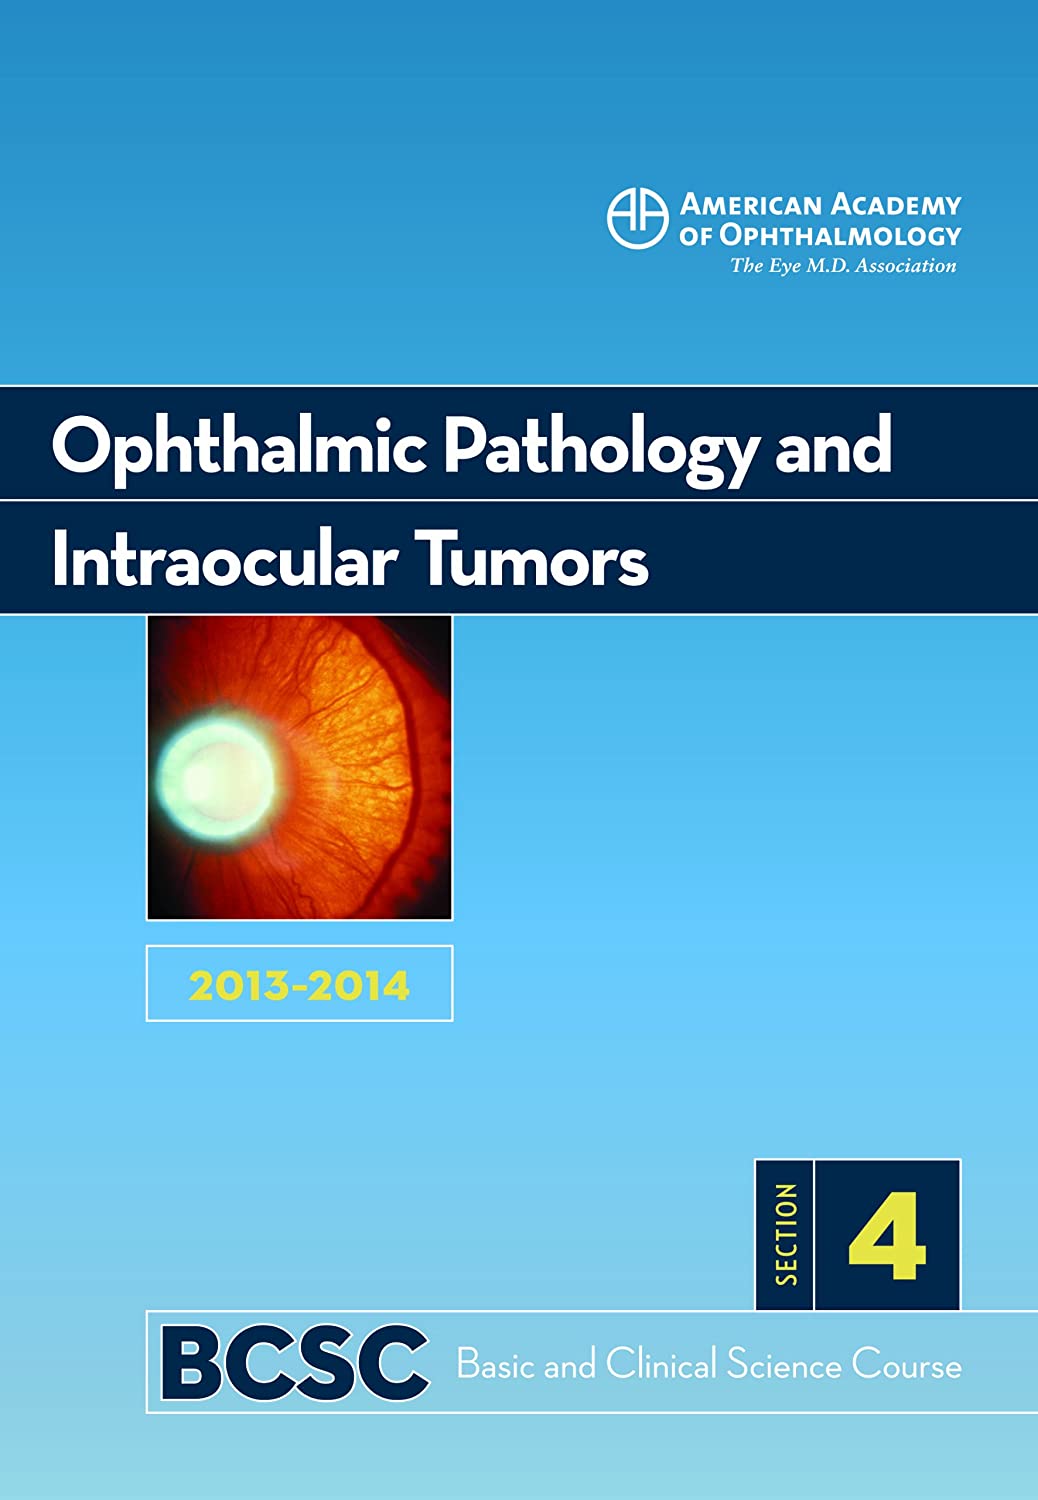 2013-2014 Basic and Clinical Science Course, Section 4: Ophthalmic Pathology and Intraocular Tumors